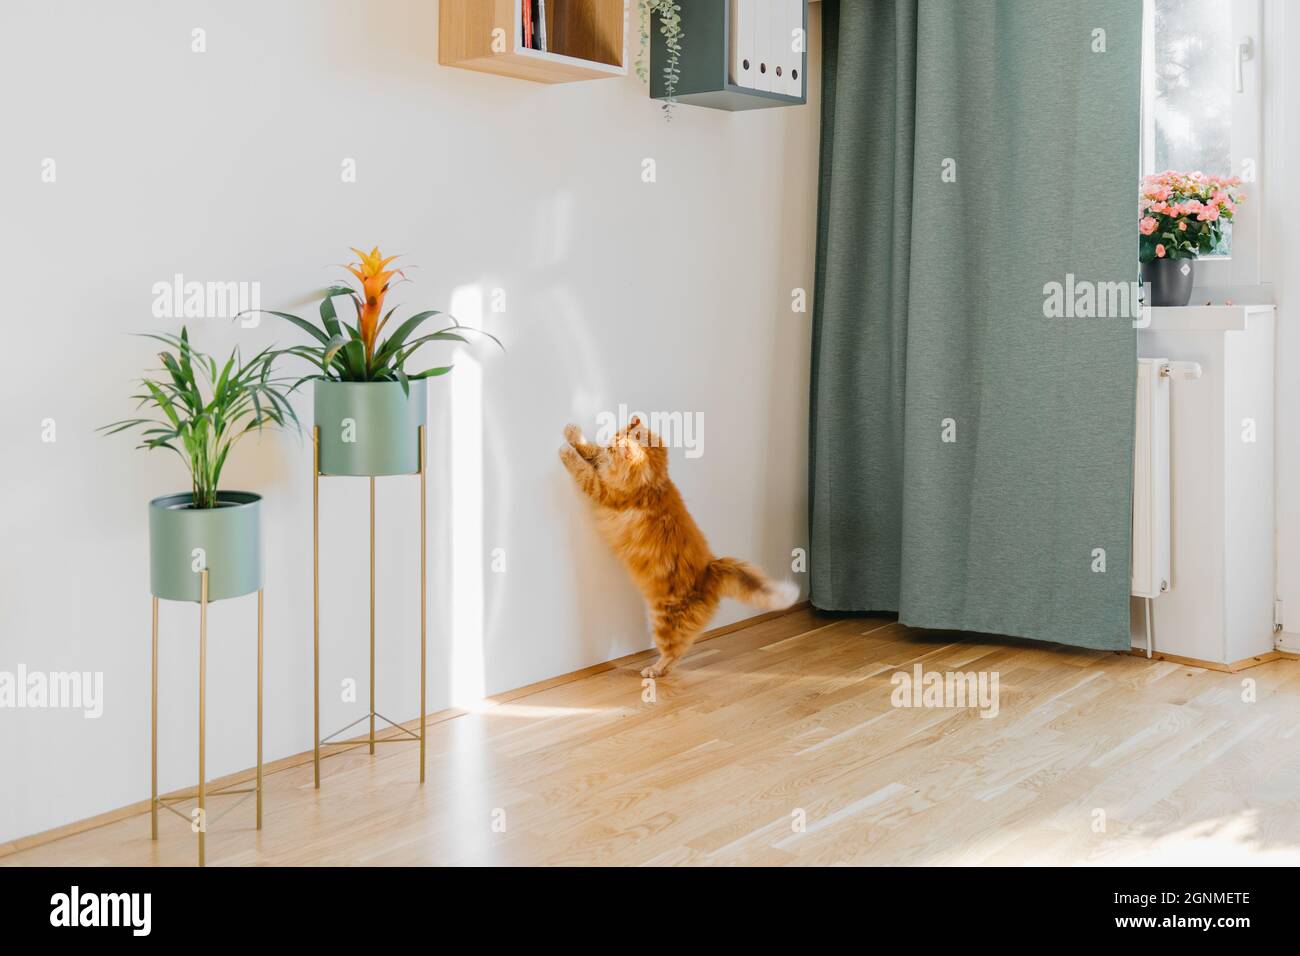 Cute ginger cat playing with sun beam indoors Stock Photo